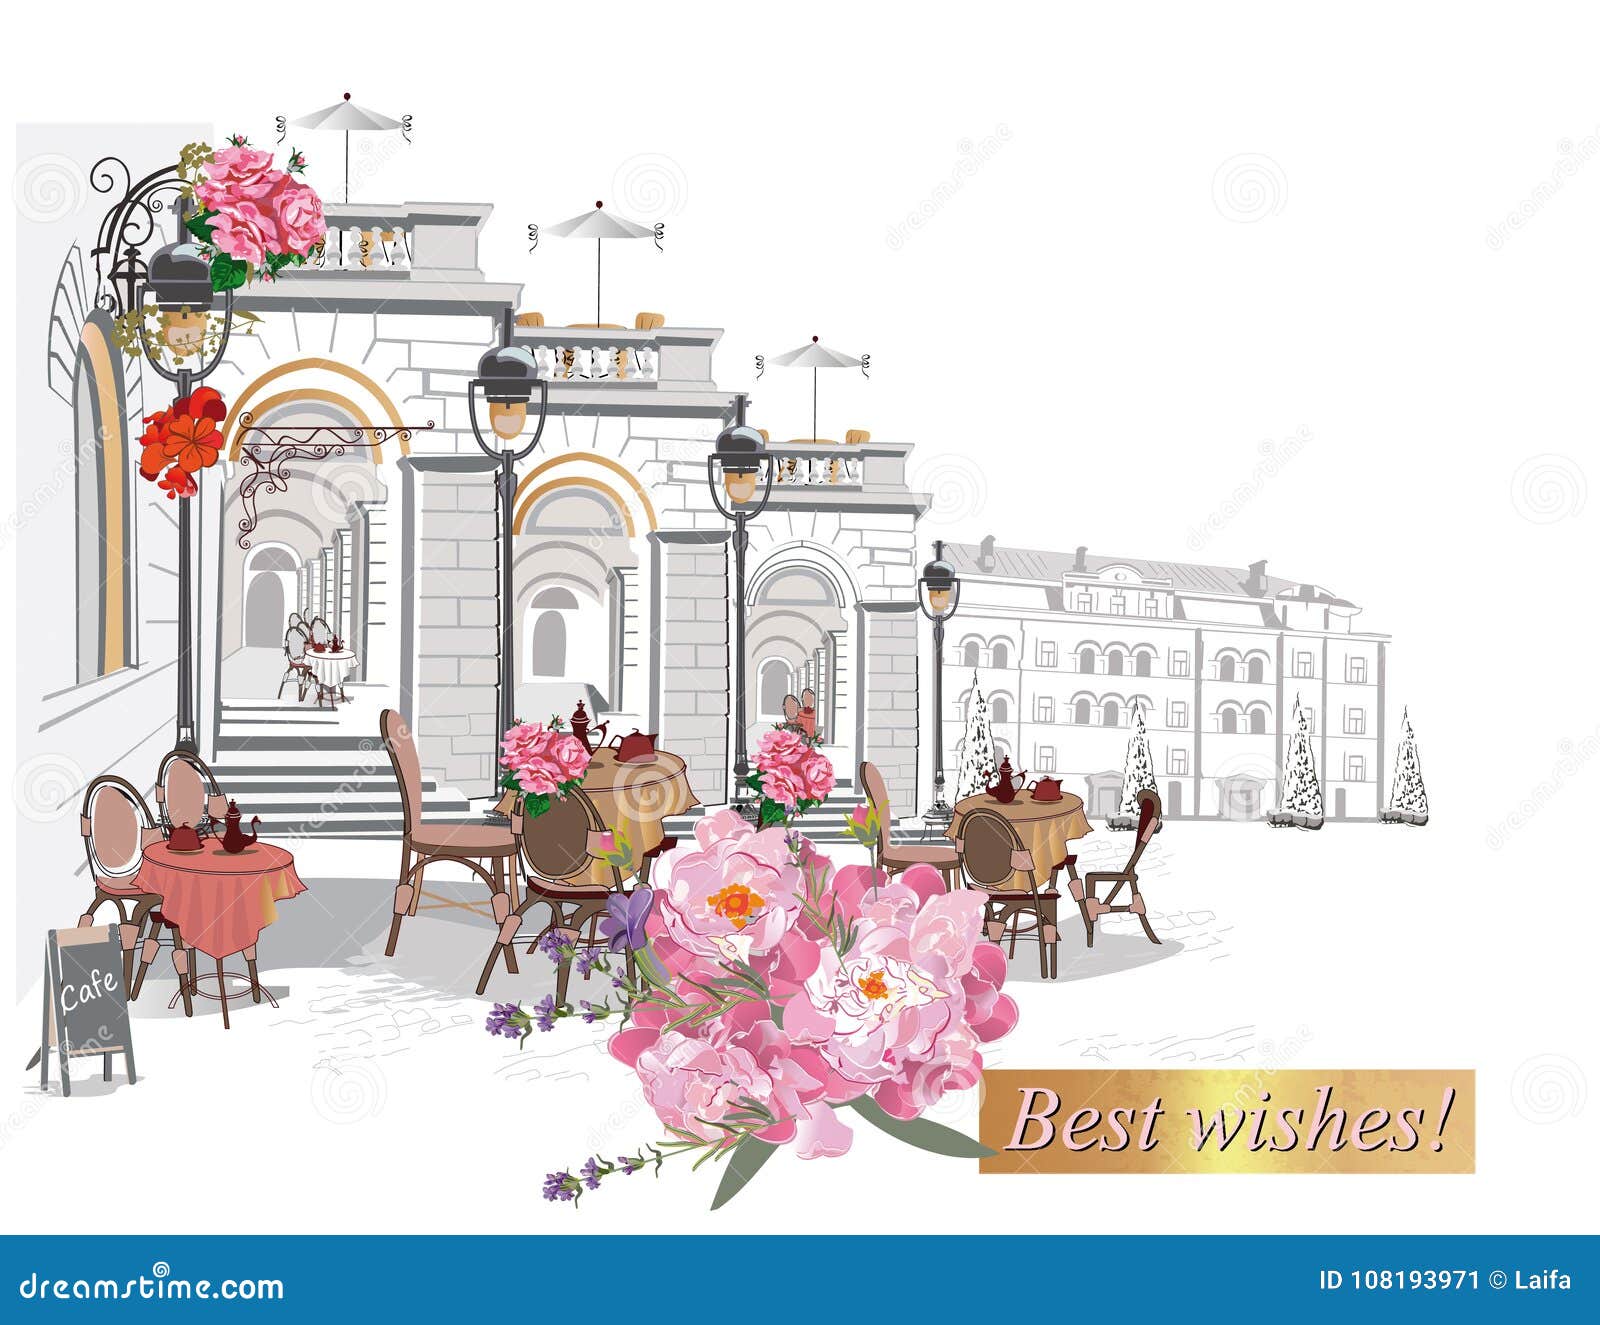 series of backgrounds decorated with flowers, old town views and street cafes.